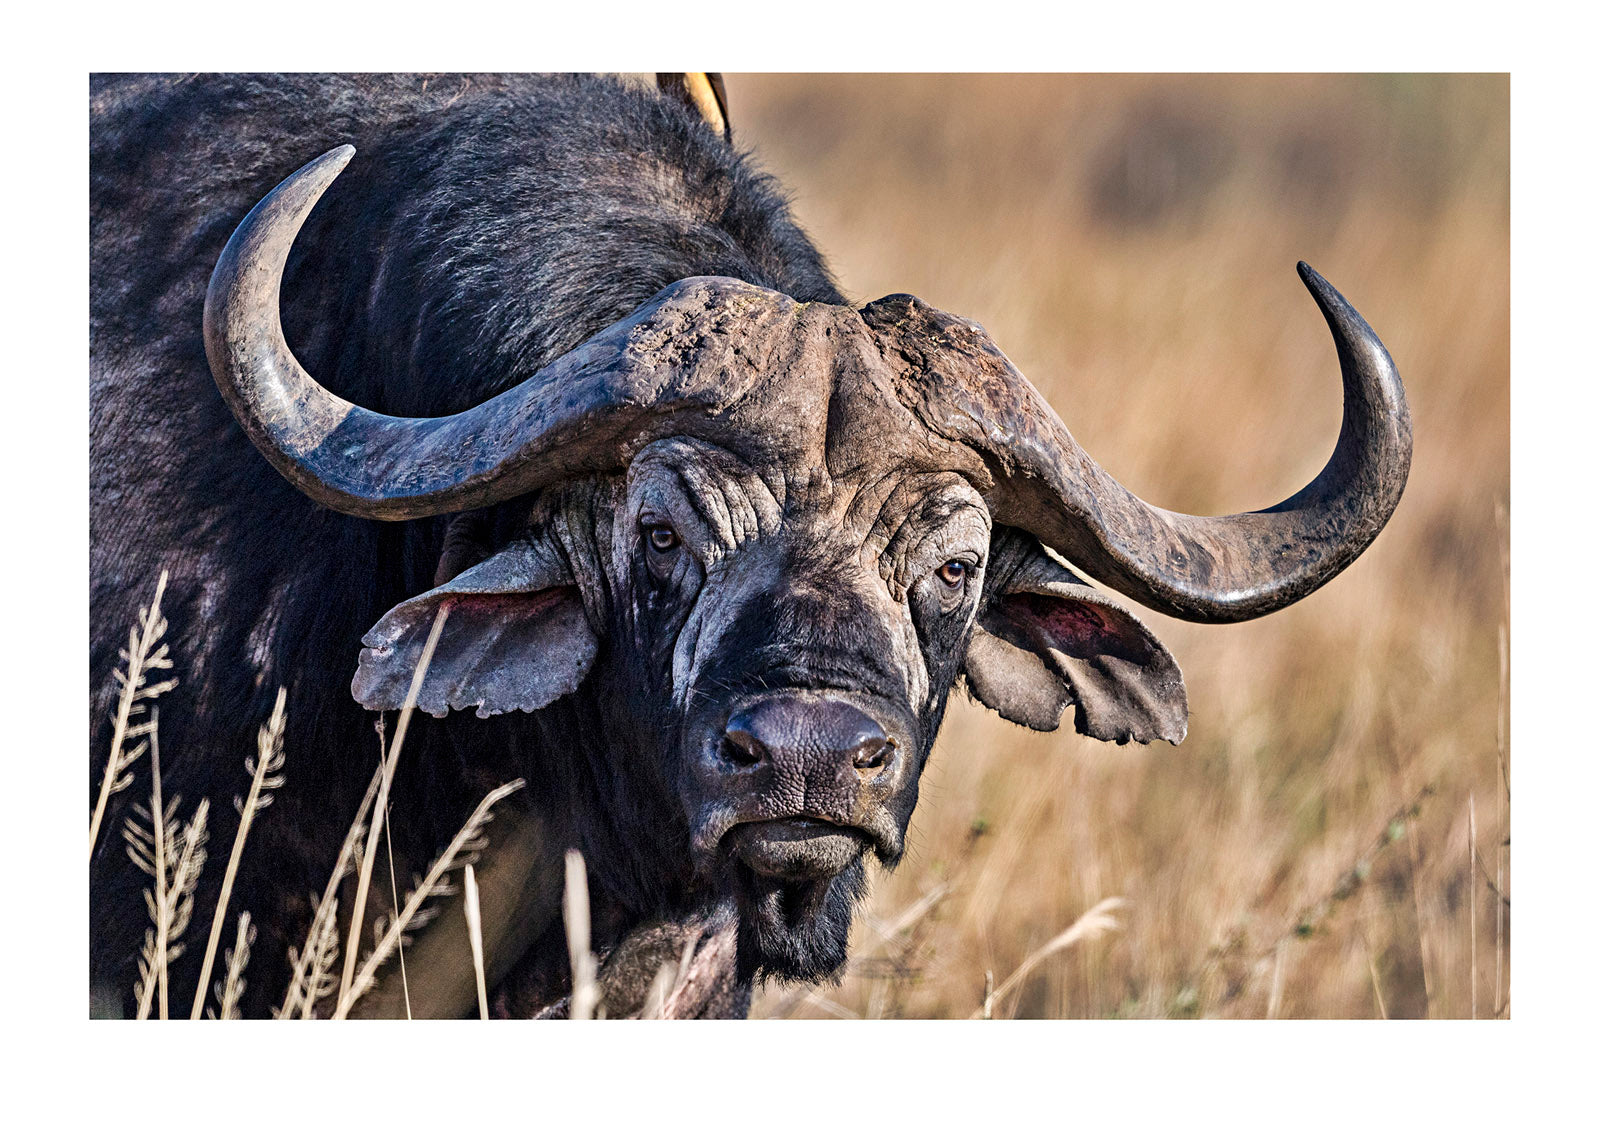 The enormous pointed horns and wrinkled face of an old African Buffalo bull, Syncerus caffer. Serengeti National Park, Tanzania